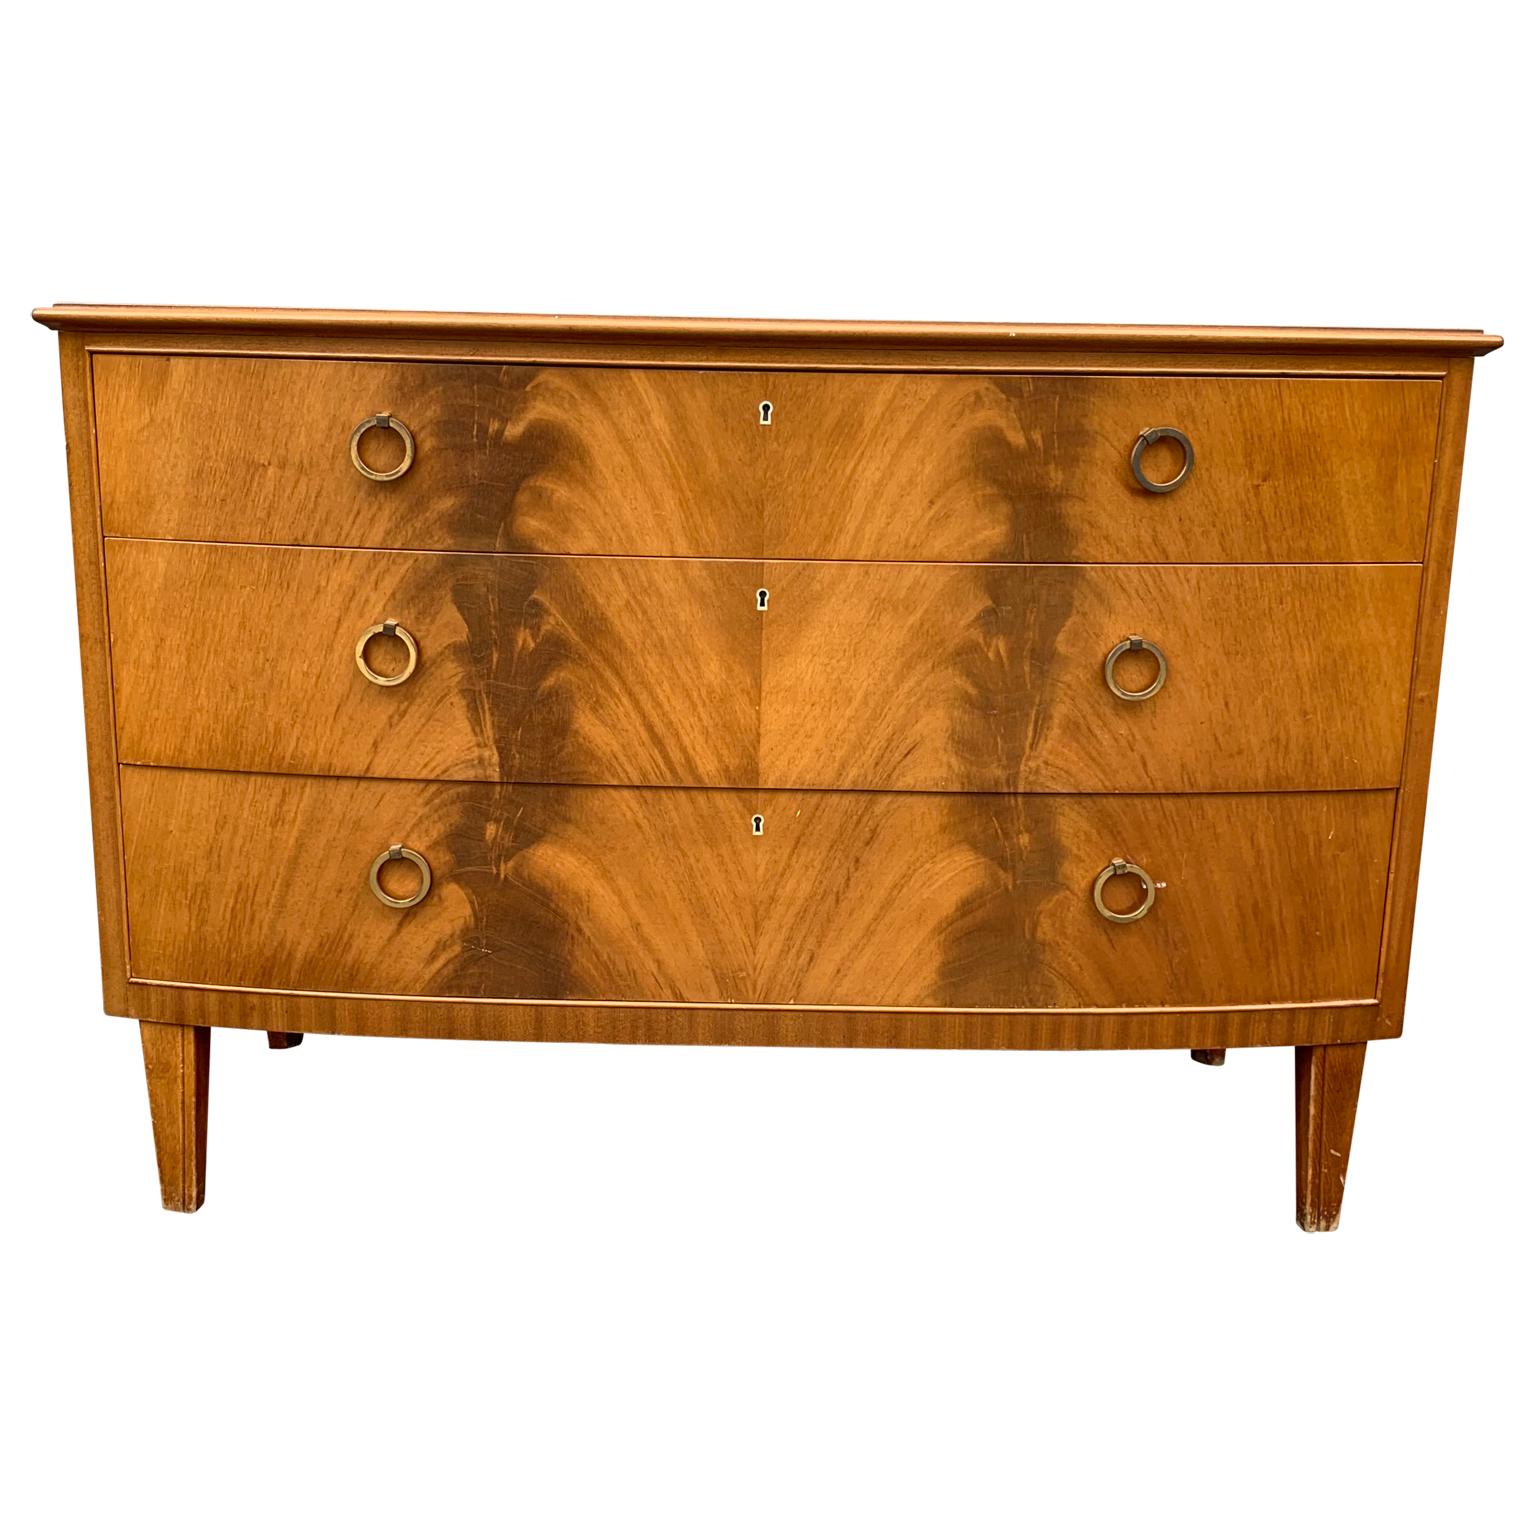 Swedish midcentury 3-drawer chest with light mahogany veneer and curved front
EUR 175 delivery to most areas of London UK, The Netherlands, Belgium, Denmark, Sweden and Northern Germany.

The mahogany veneer appears lighter overall from exposure to